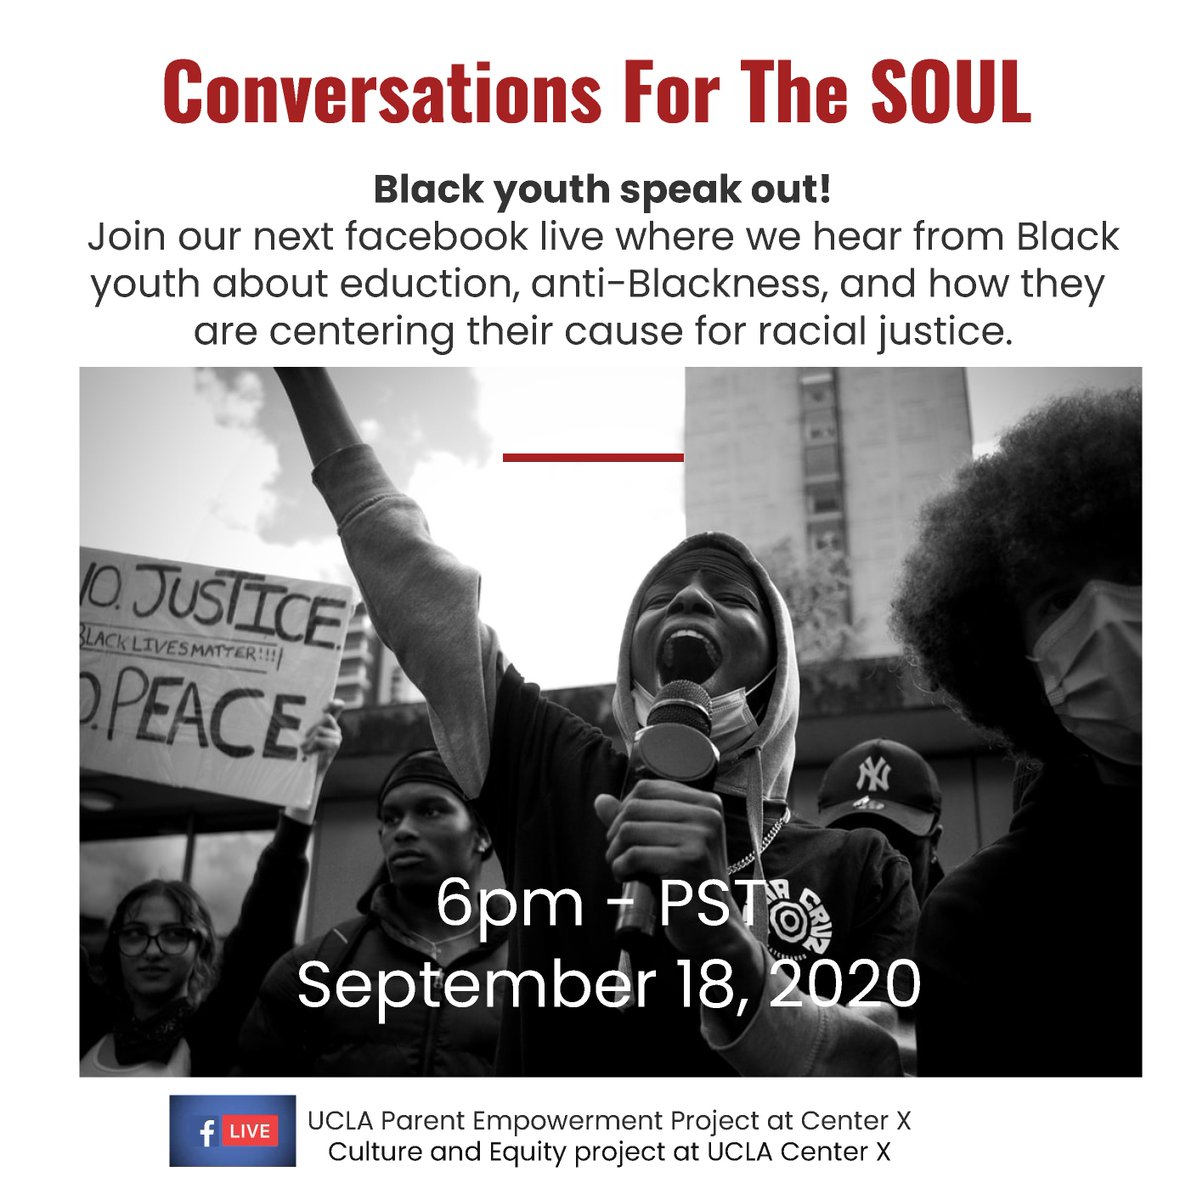 Please join us on Facebook Live: 'Conversations for the Soul-Black youth speak out!' Happening September 18, 2020. #antiblackness #racialjustice #education @UCLAParentPower @UCLACEP